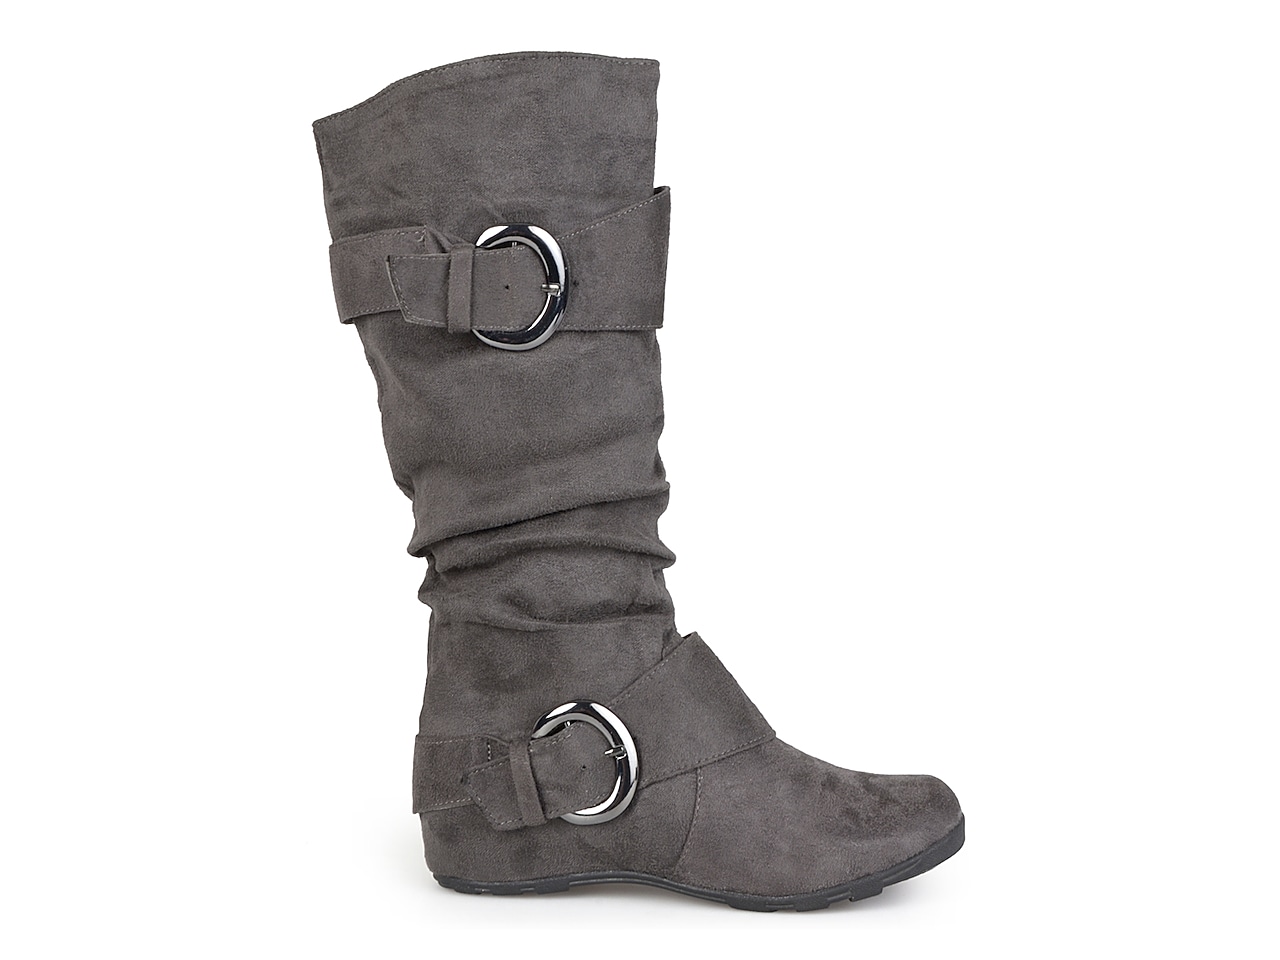 Journee Collection Jester Extra Wide Calf Boot Women's Shoes | DSW